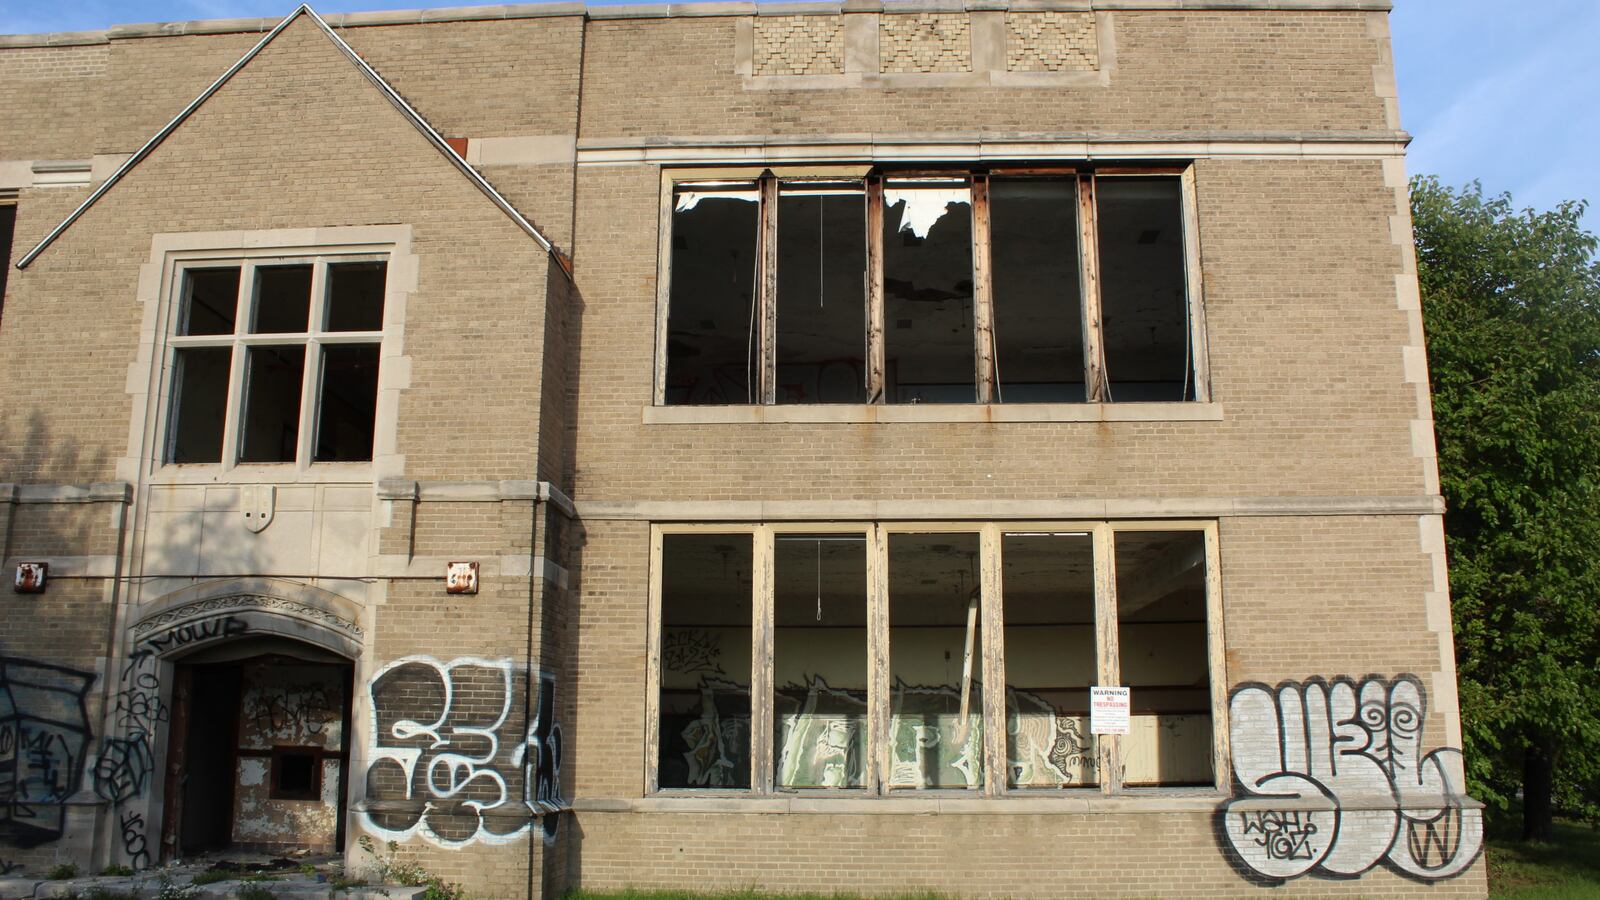 The president of the Detroit Latin School Board proposed raising $75 million to renovate the dilapidated Brady Elementary School. It's not clear how much has been raised.